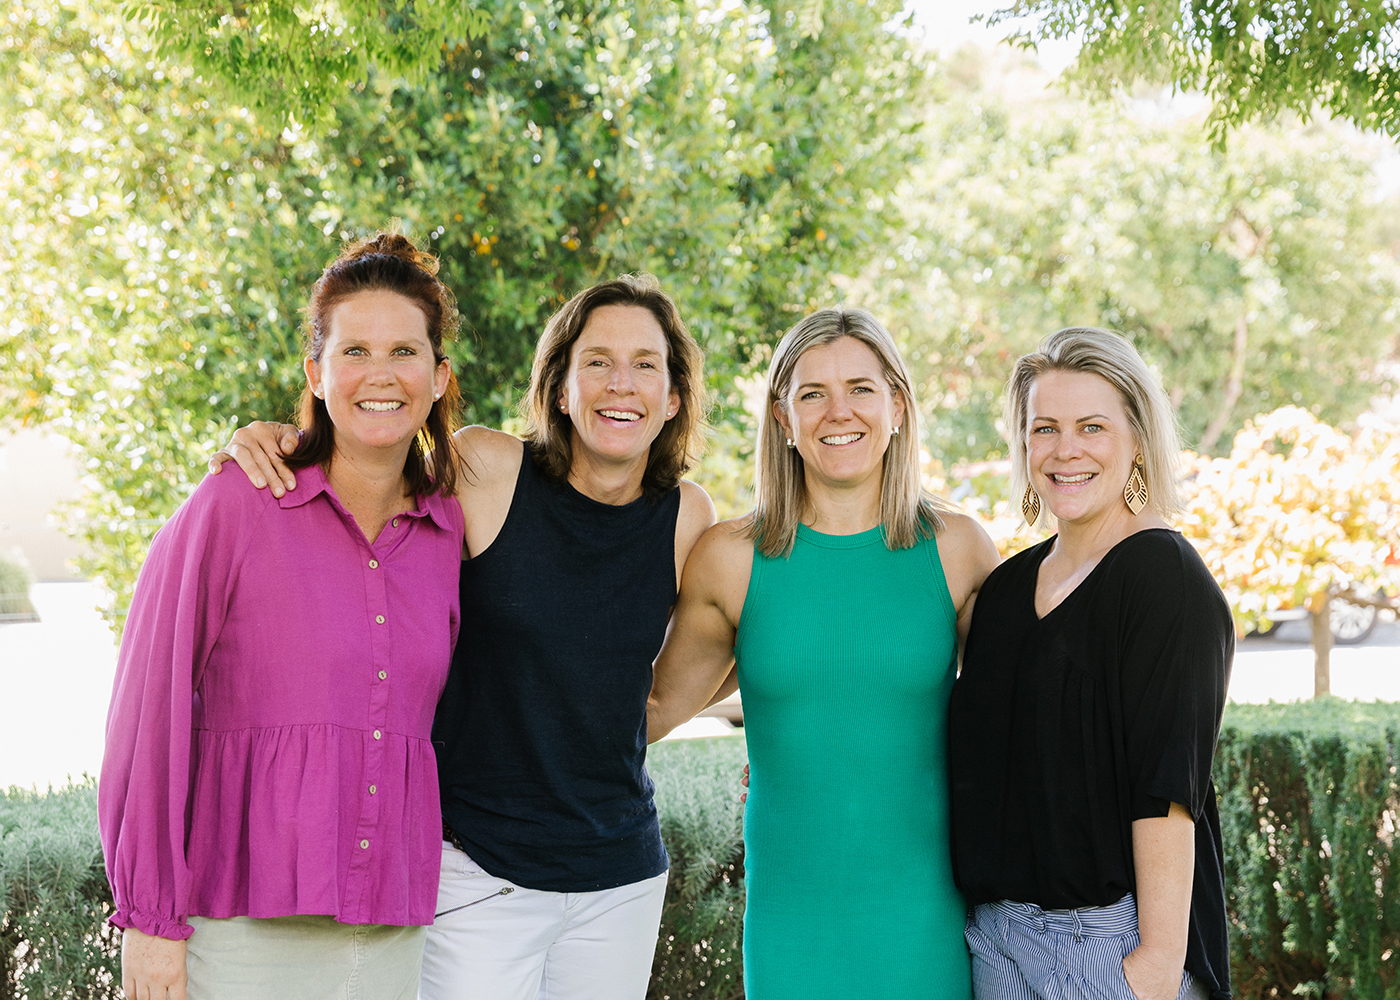 Small Victories Wine Co team members, Jess, Jules, Bec and Karli